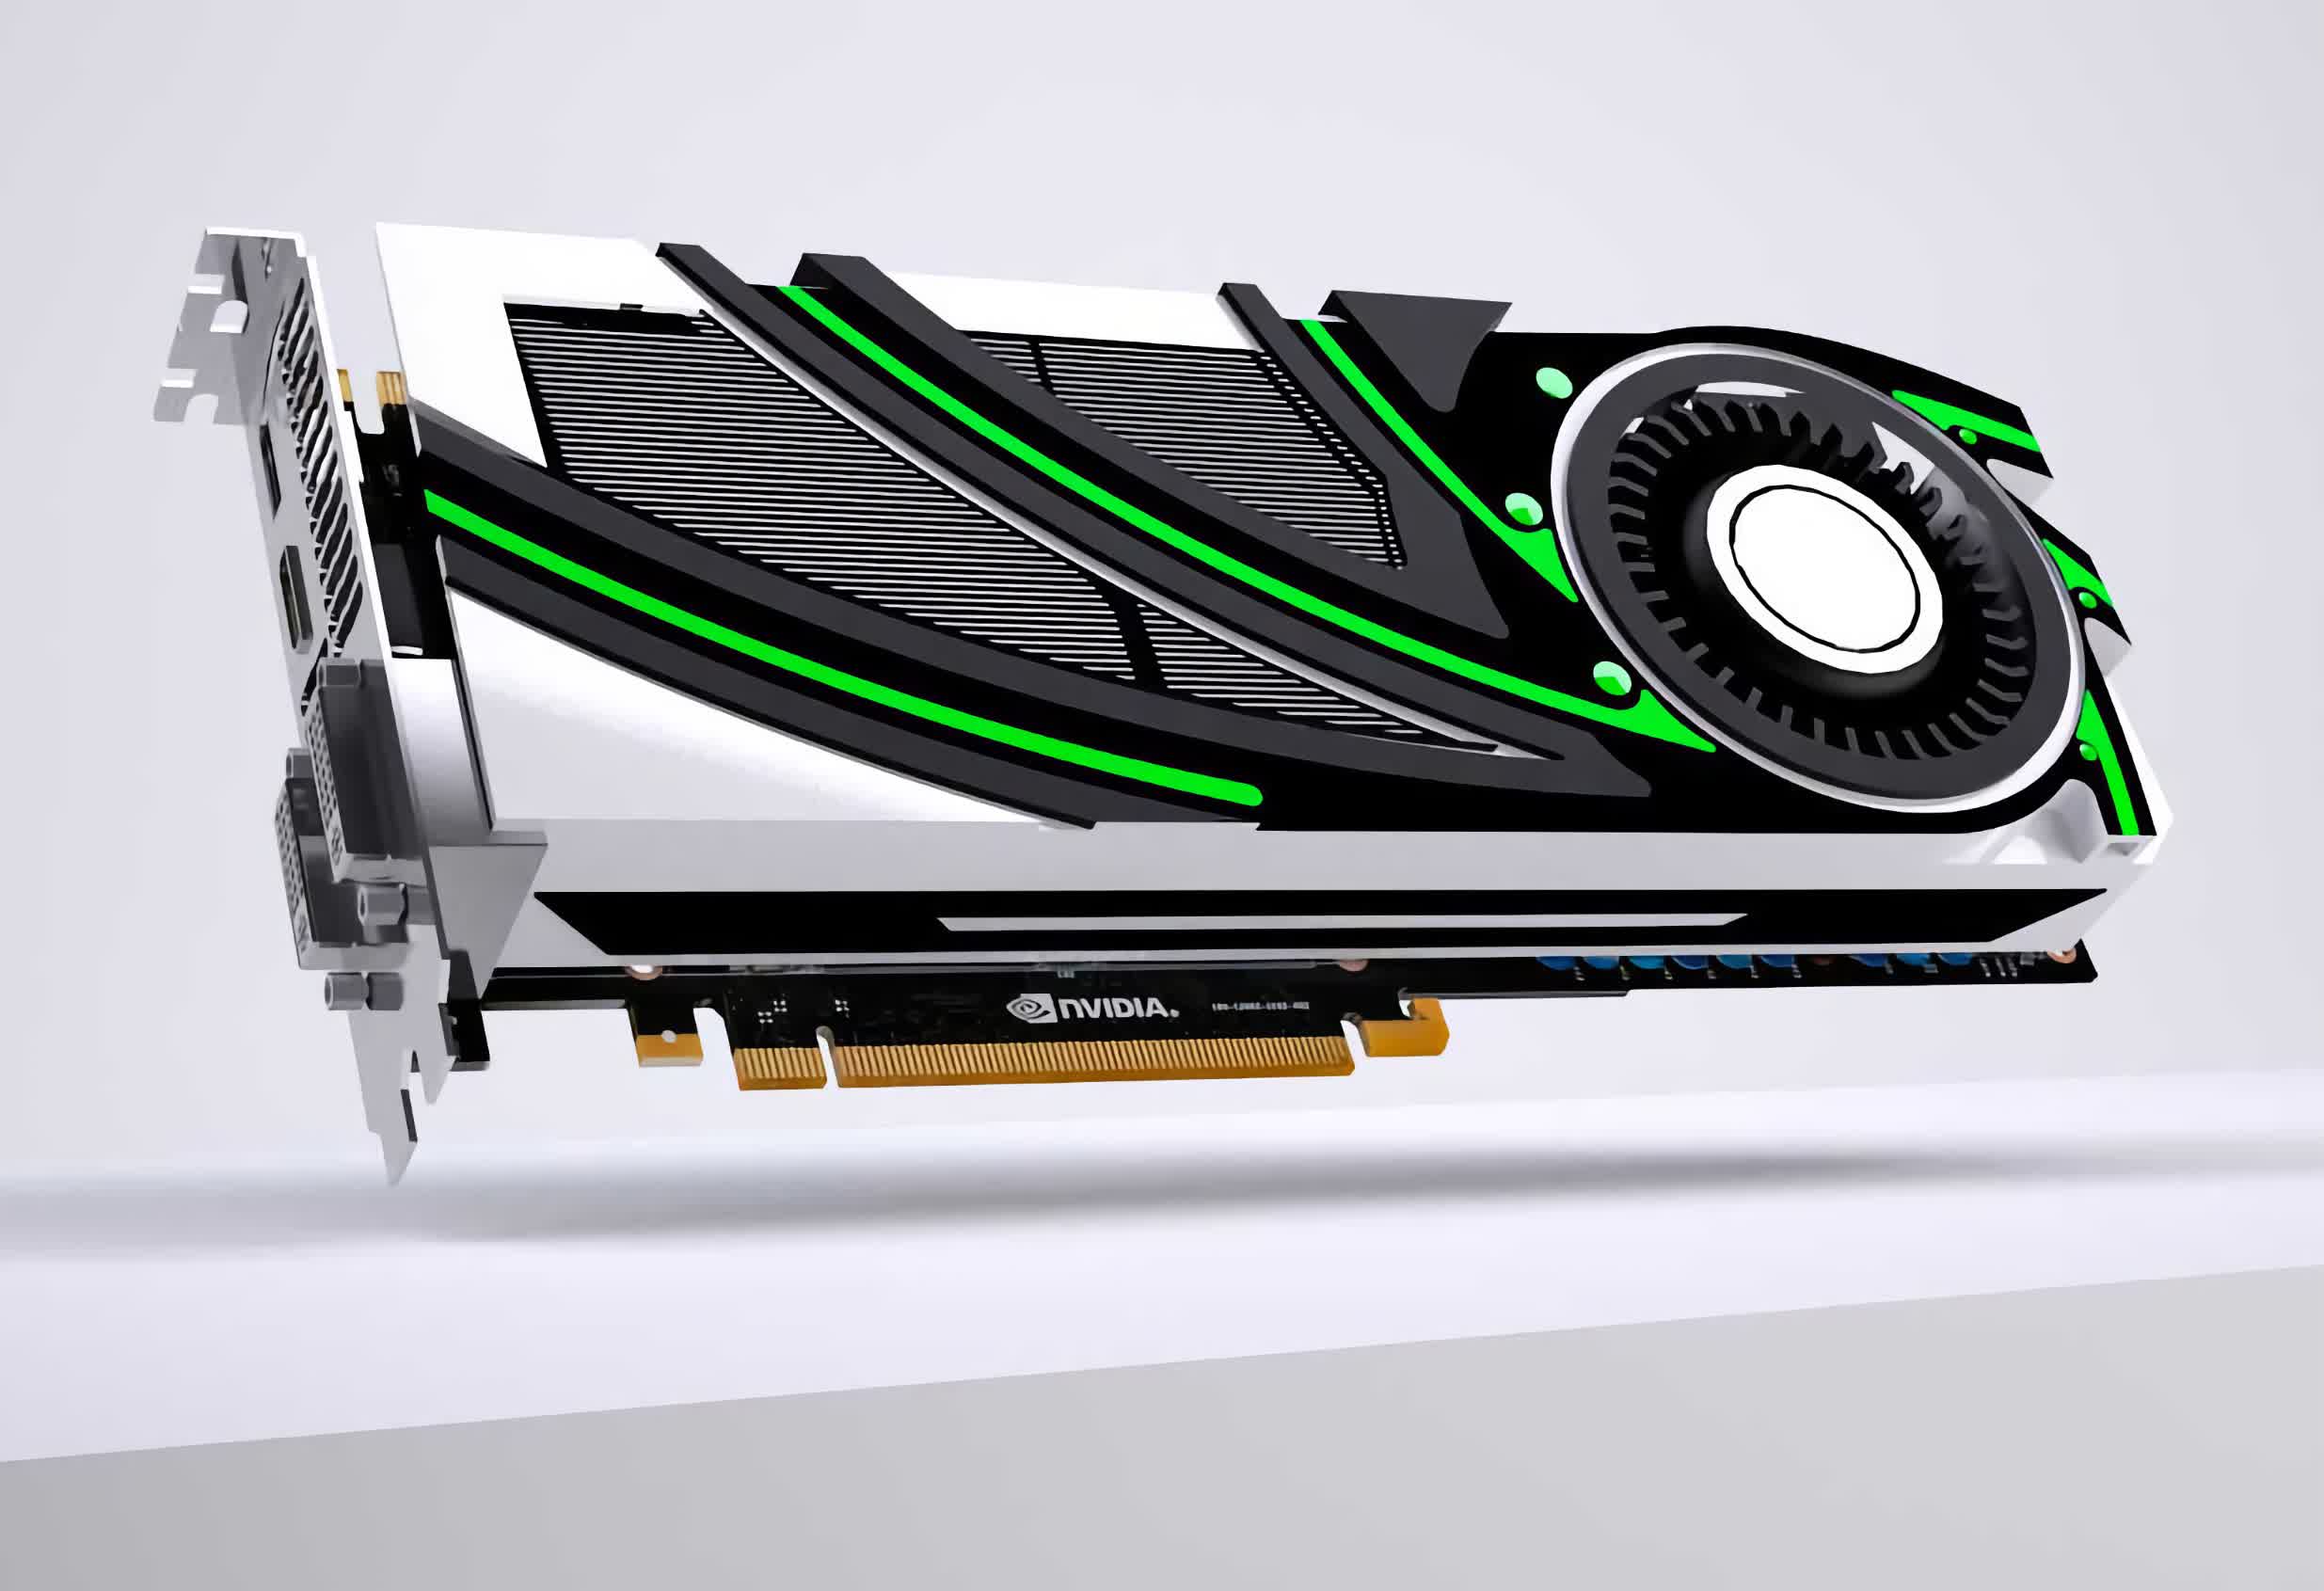 Nvidia teases ProjectBeyond, which is almost certainly its RTX 4000 graphics cards